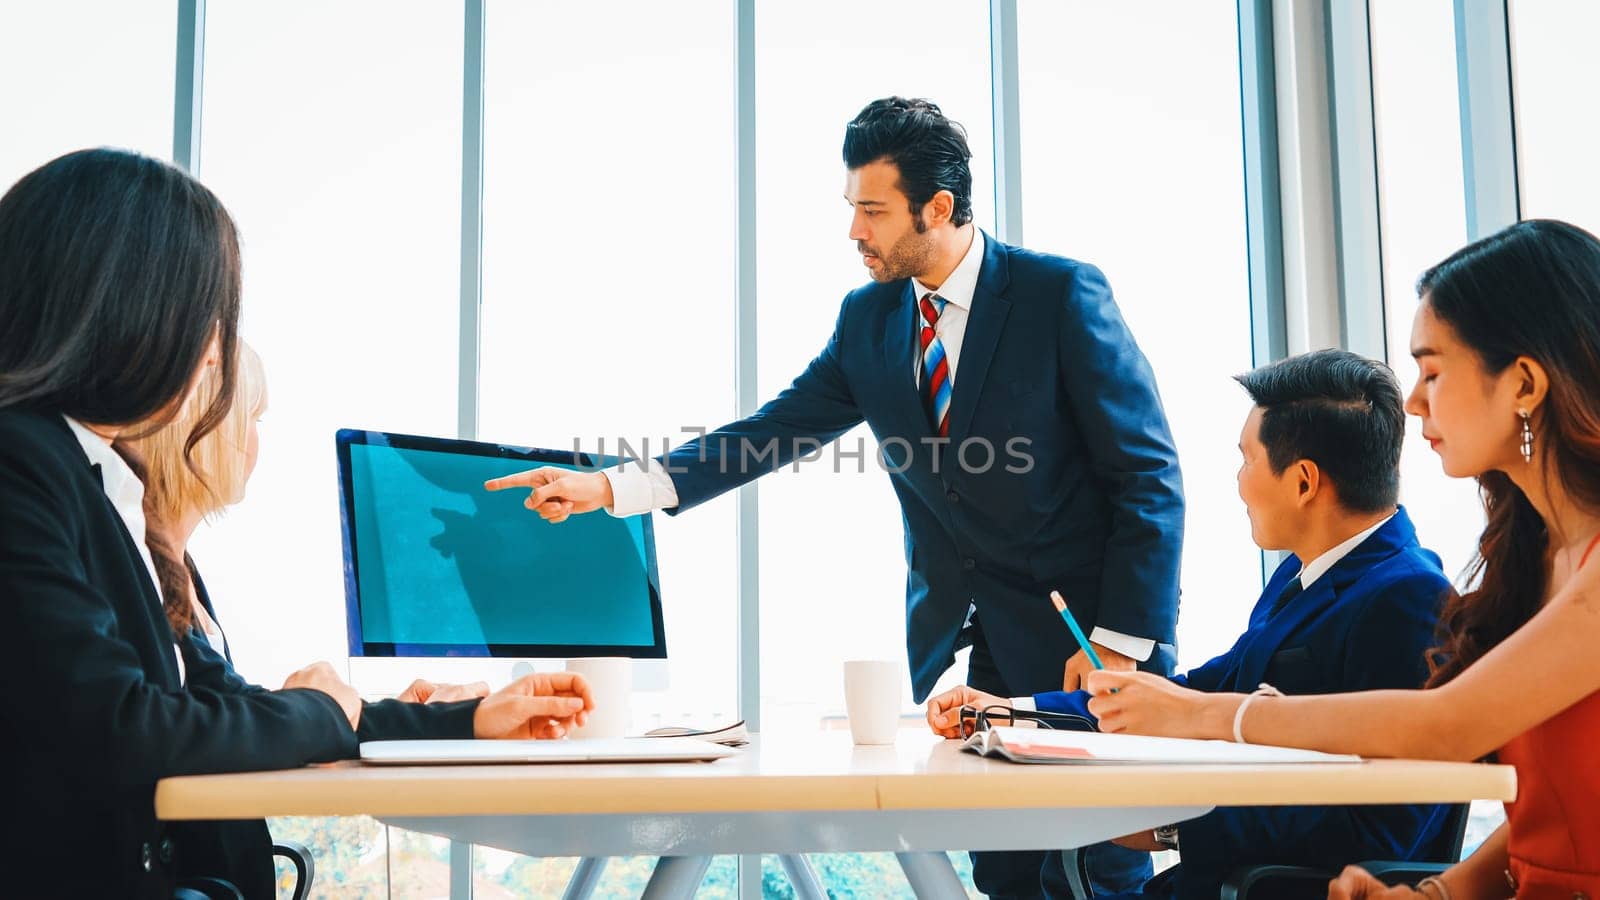 Business people in the conference room with green screen Jivy by biancoblue